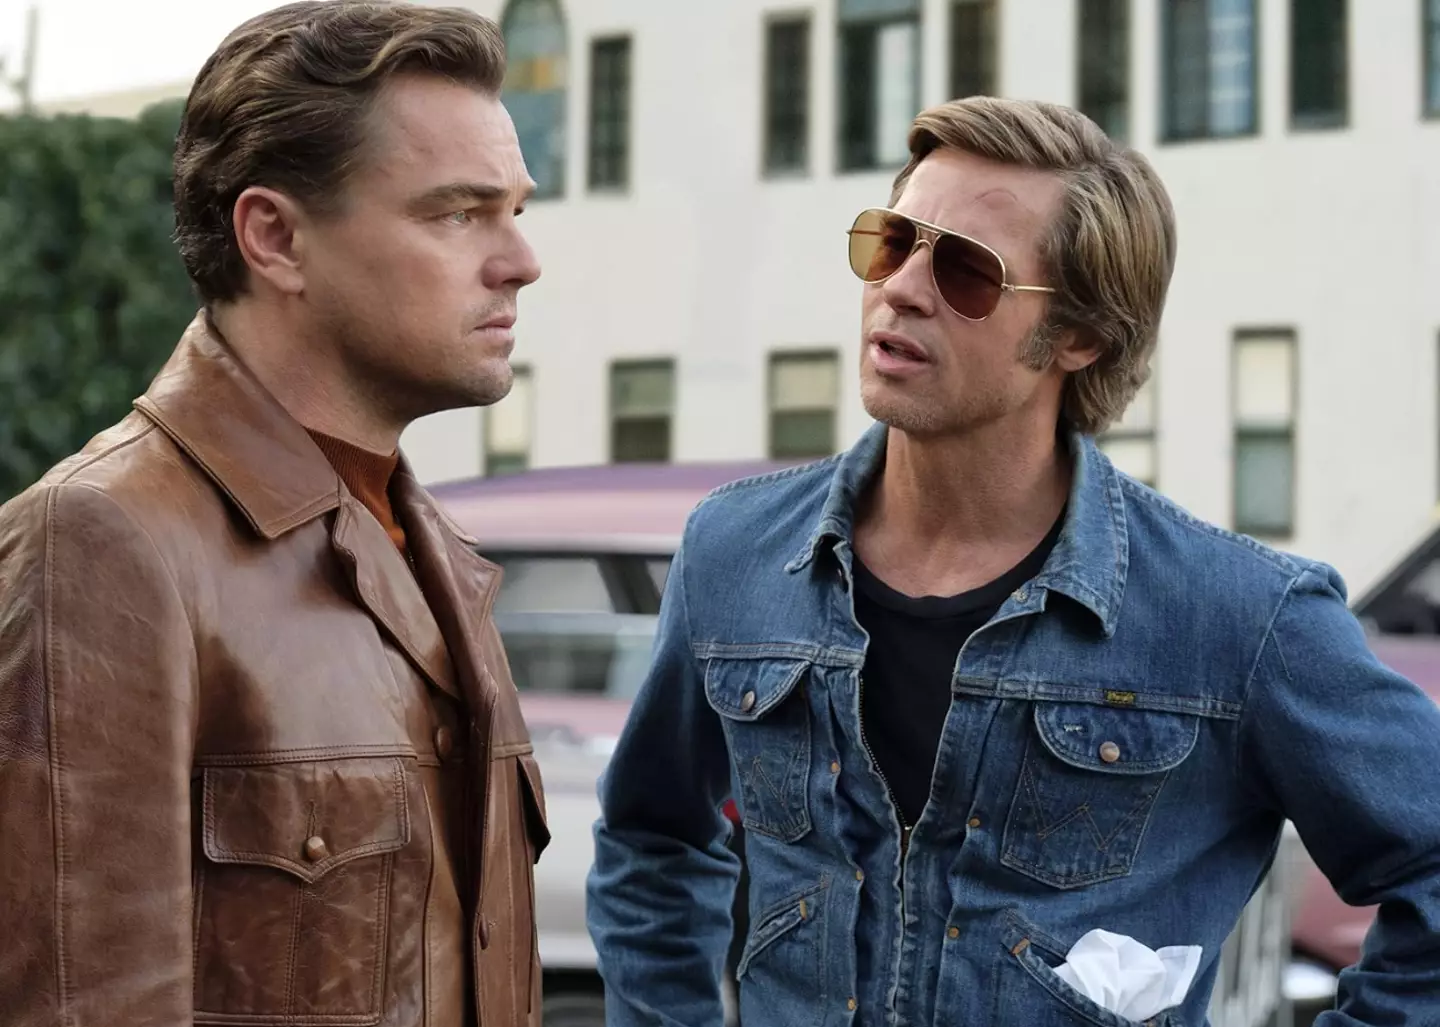 Leonardo DiCaprio and Brad Pitt in Once Upon a Time in Hollywood. (Sony Pictures)